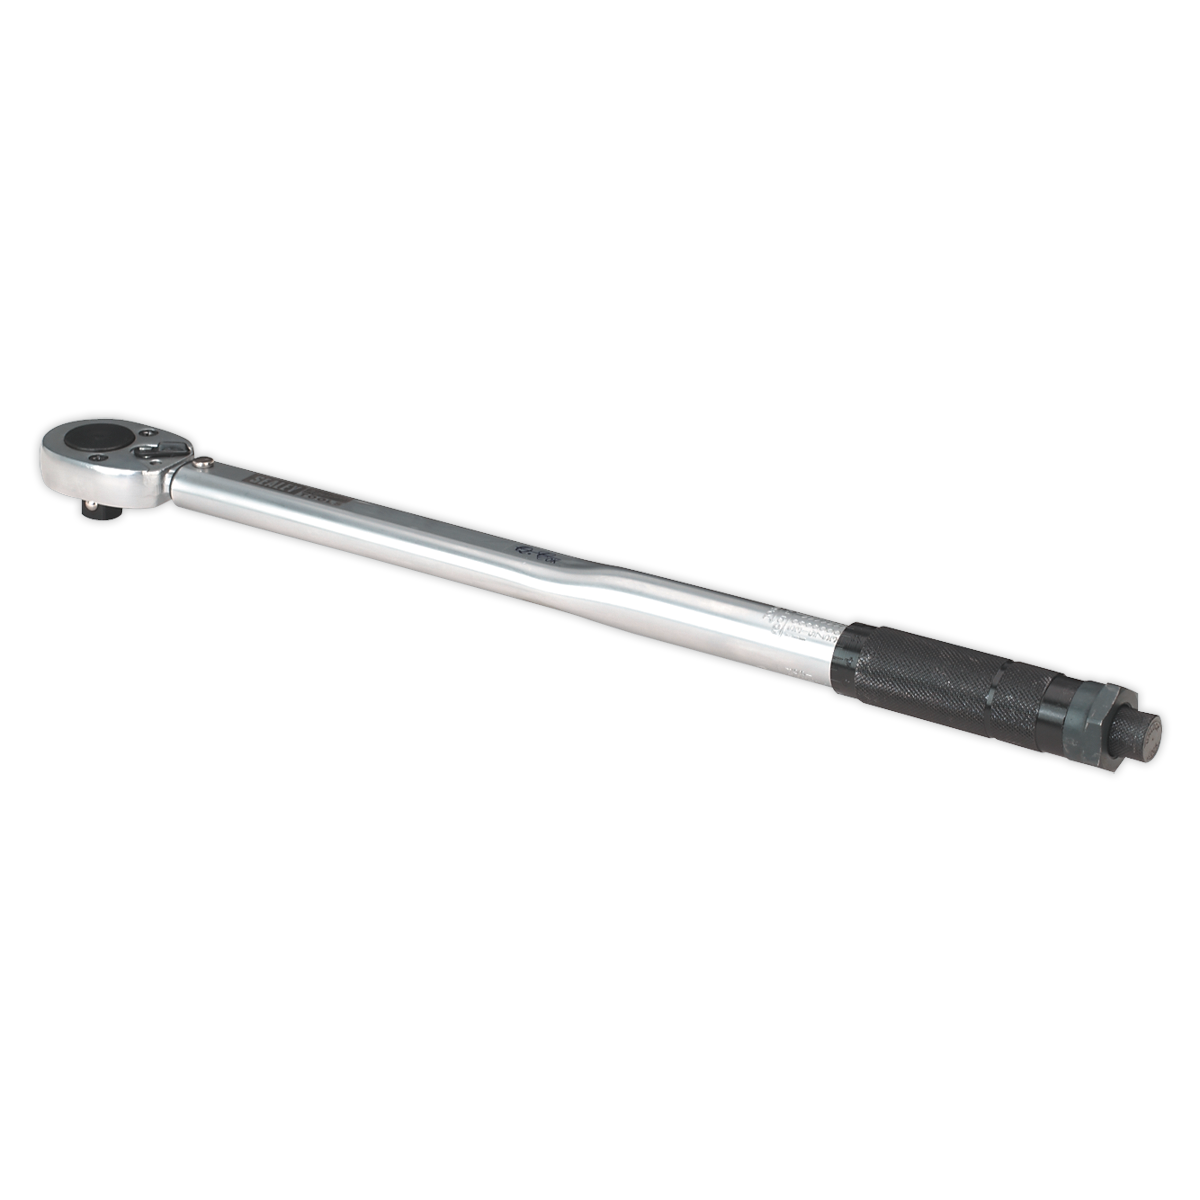 Micrometer Torque Wrench 1/2"Sq Drive Calibrated - AK624 - Farming Parts